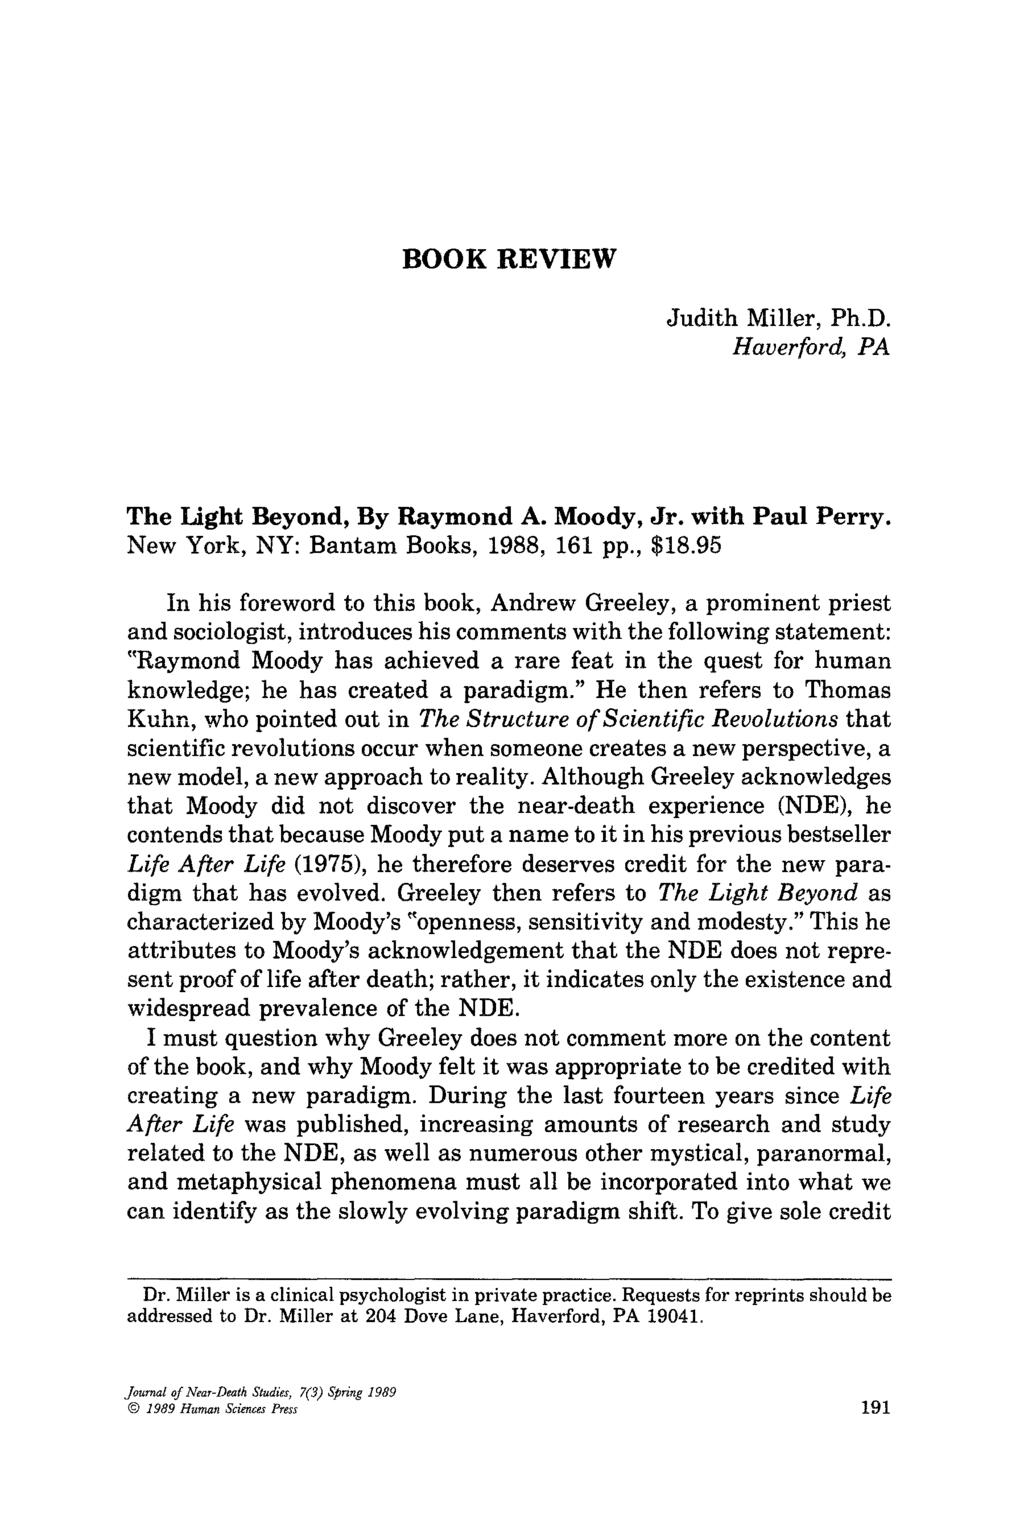 BOOK REVIEW Judith Miller, Ph.D. Haverford, PA The Light Beyond, By Raymond A. Moody, Jr. with Paul Perry. New York, NY: Bantam Books, 1988, 161 pp., $18.